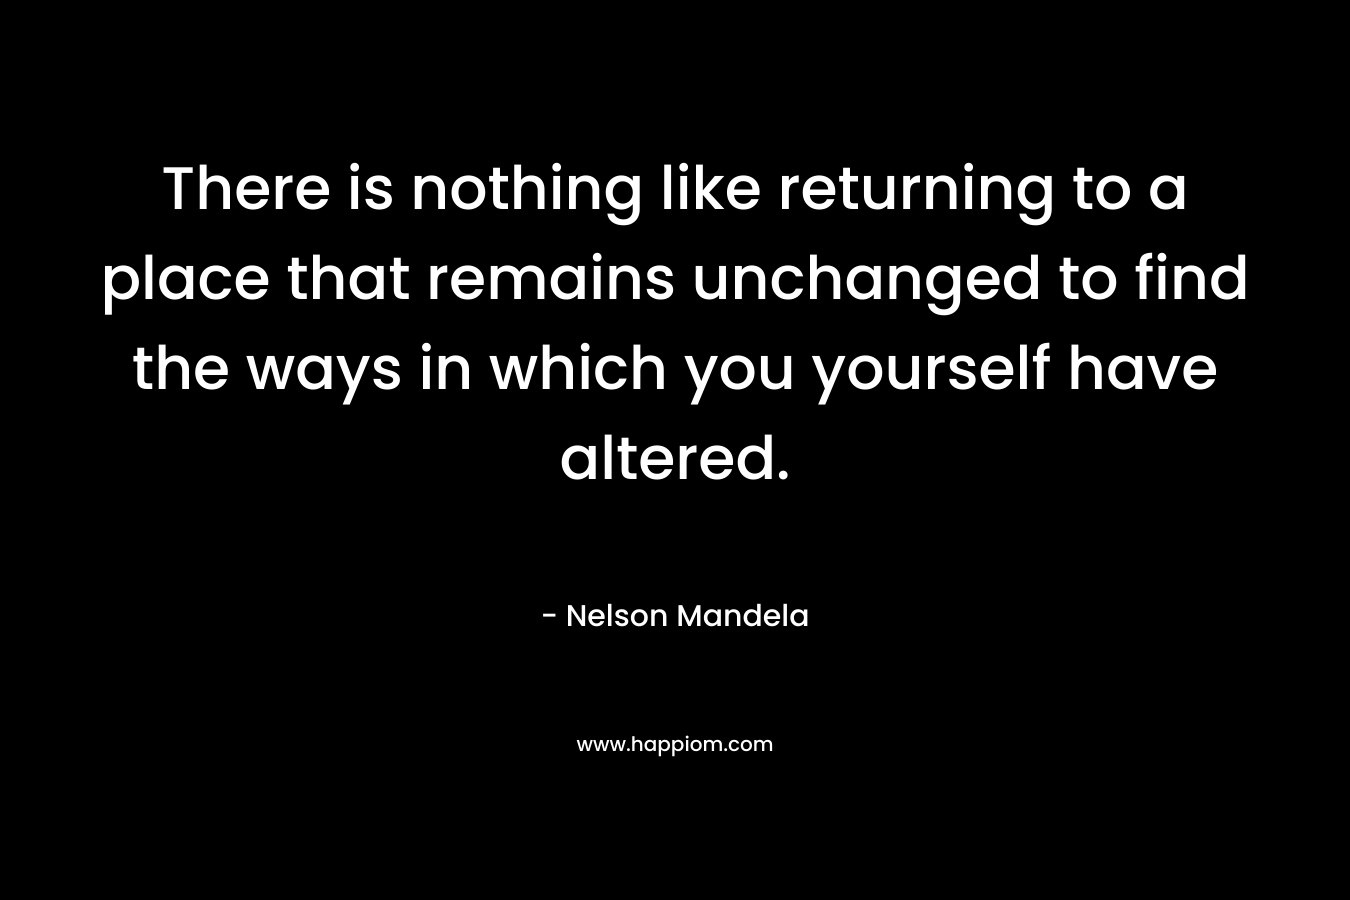 There is nothing like returning to a place that remains unchanged to find the ways in which you yourself have altered. – Nelson Mandela